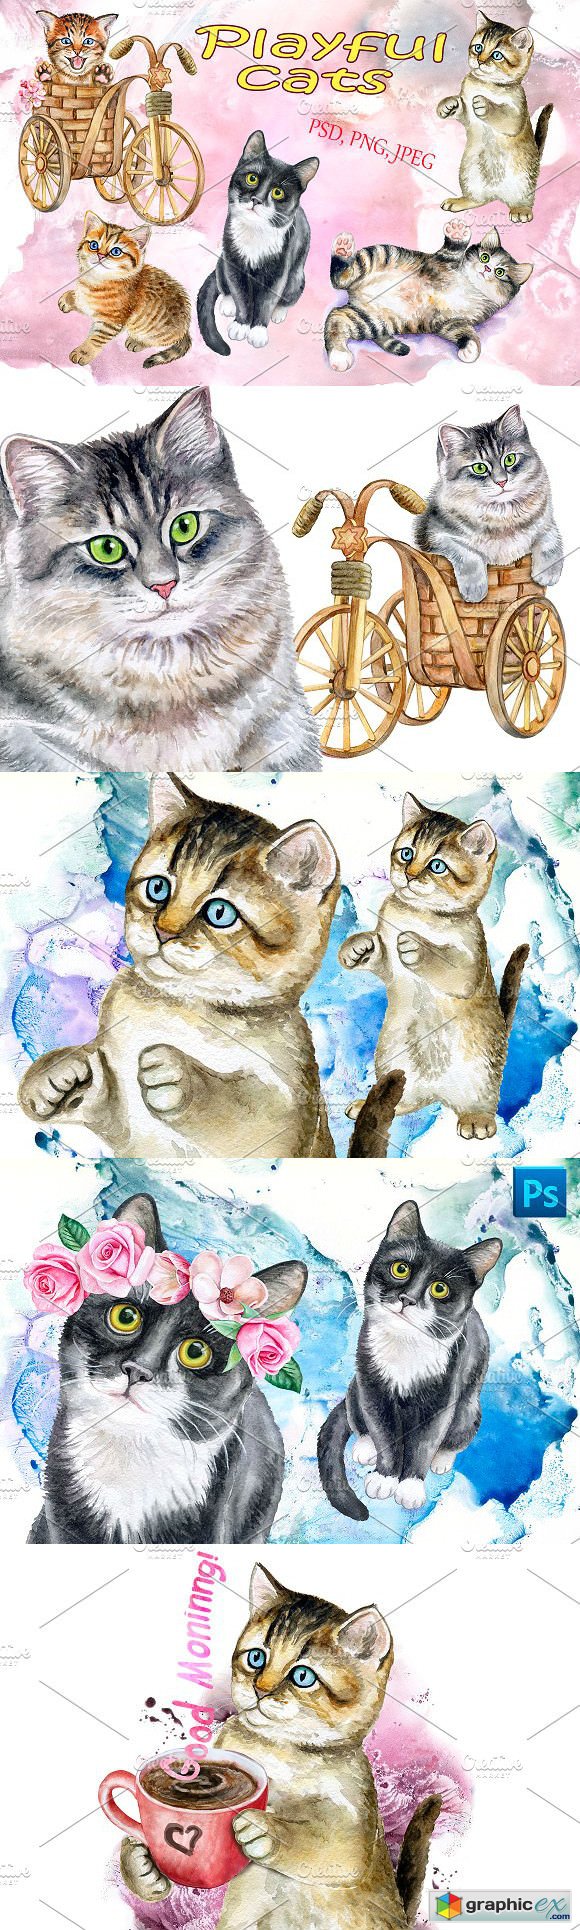 Playful cats Watercolor